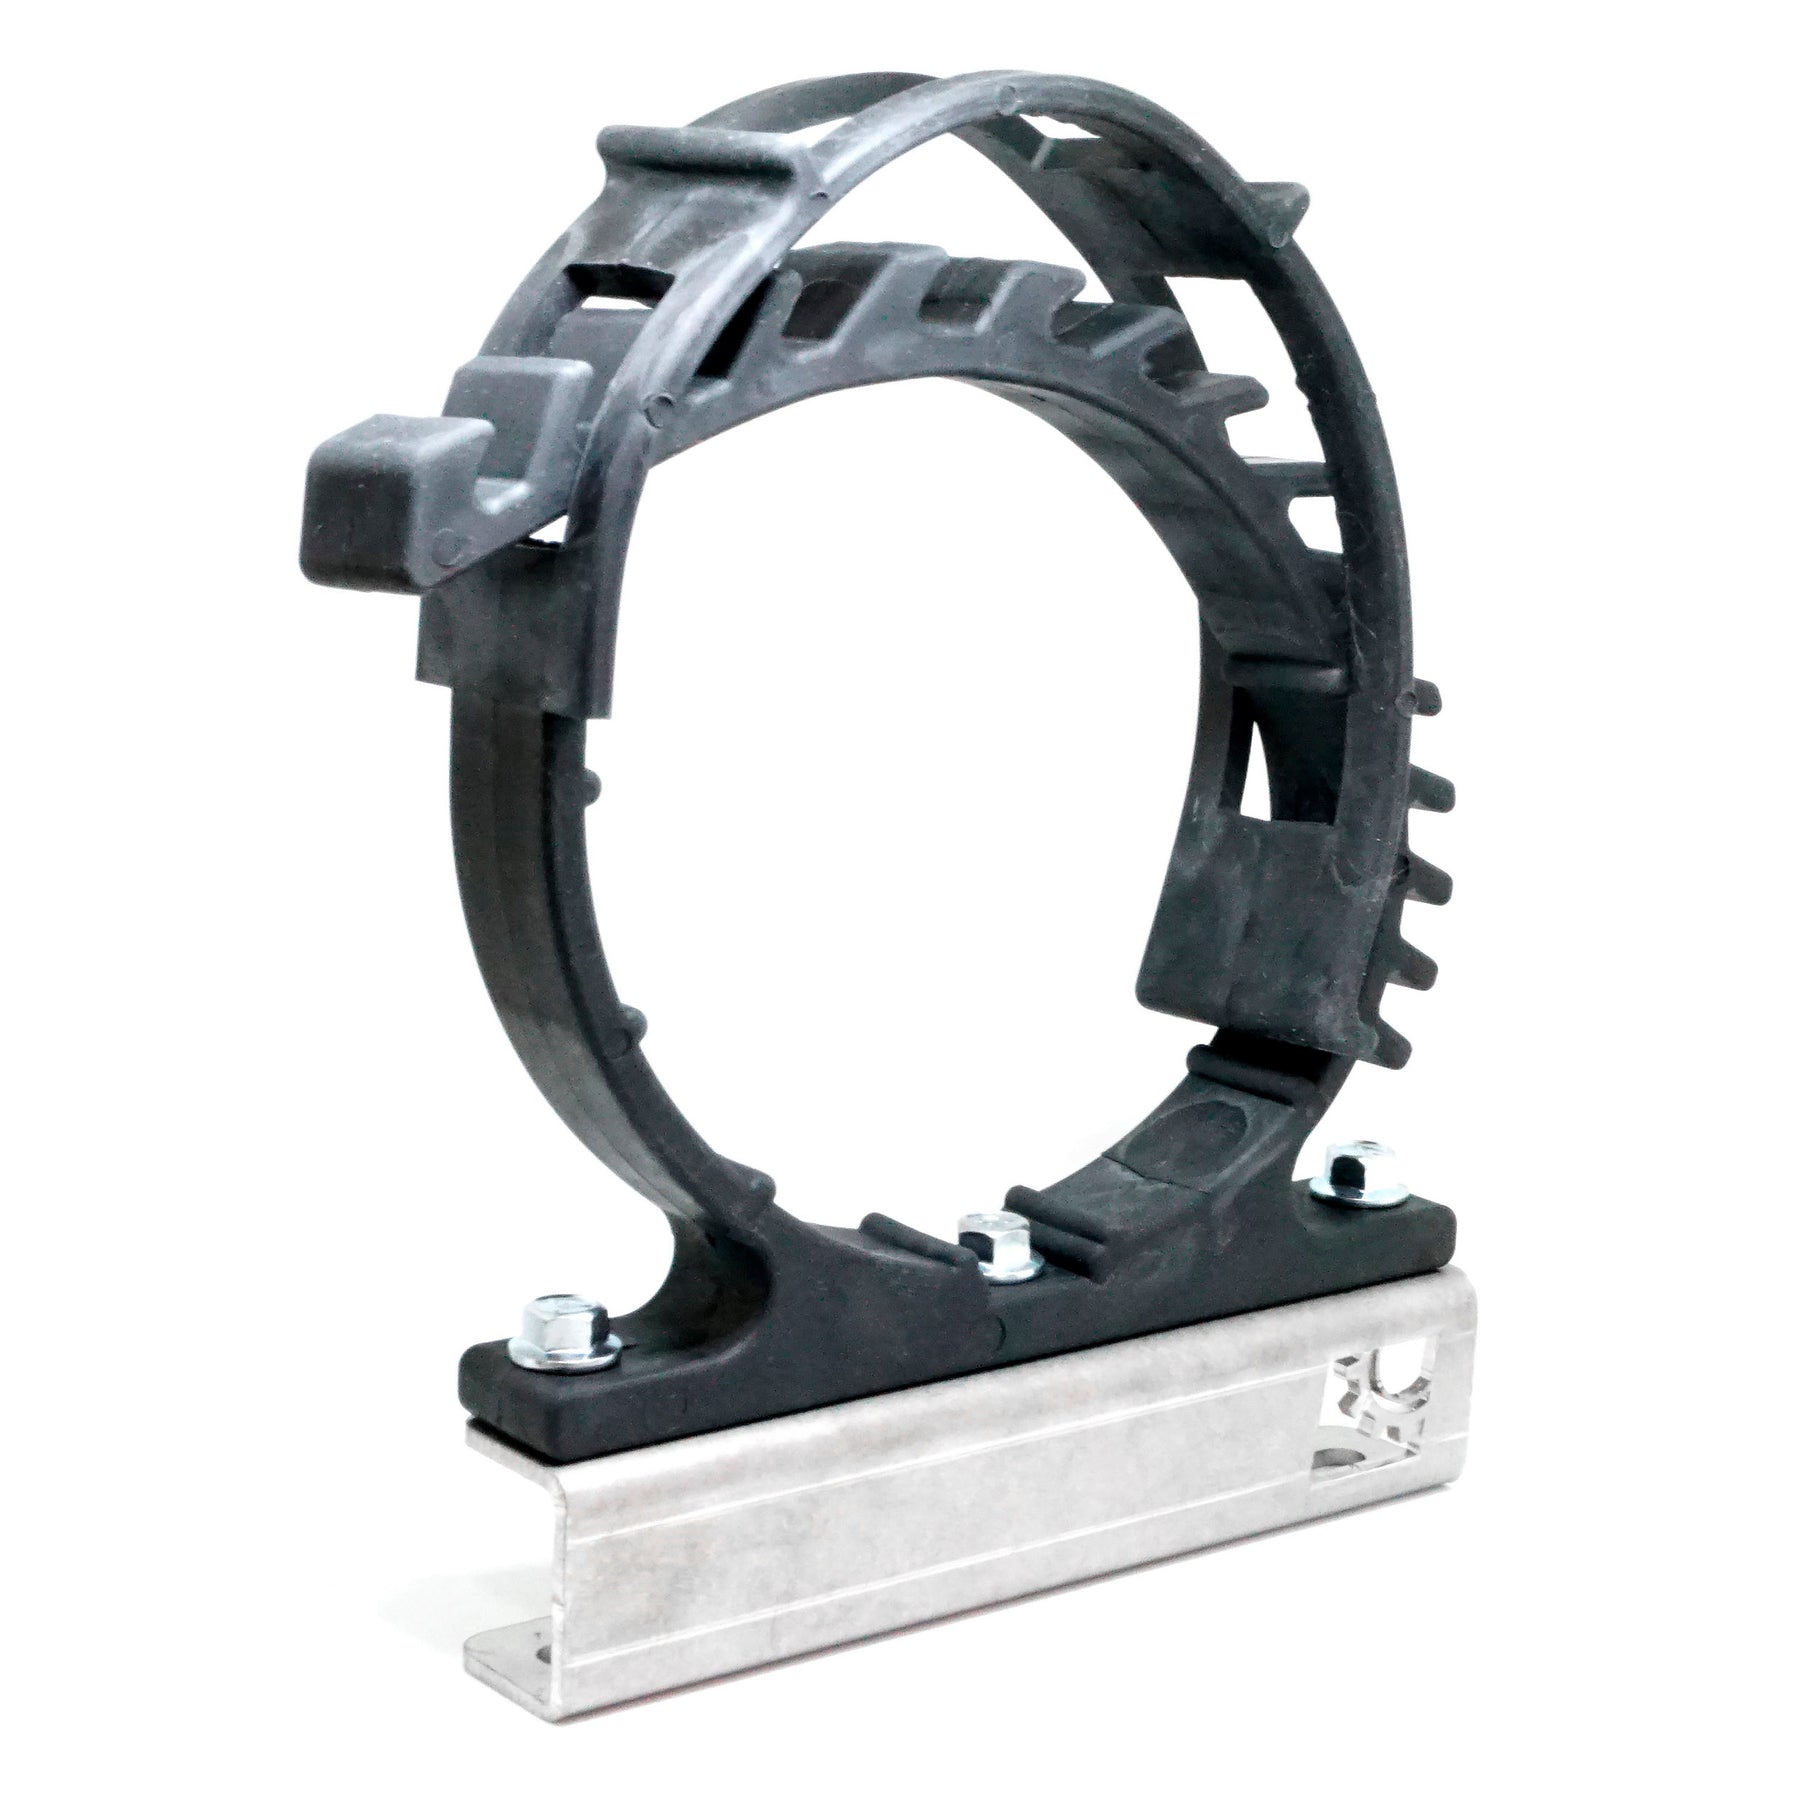 BuiltRight Industries - Riser - Clamp Super Mount Fist Quick